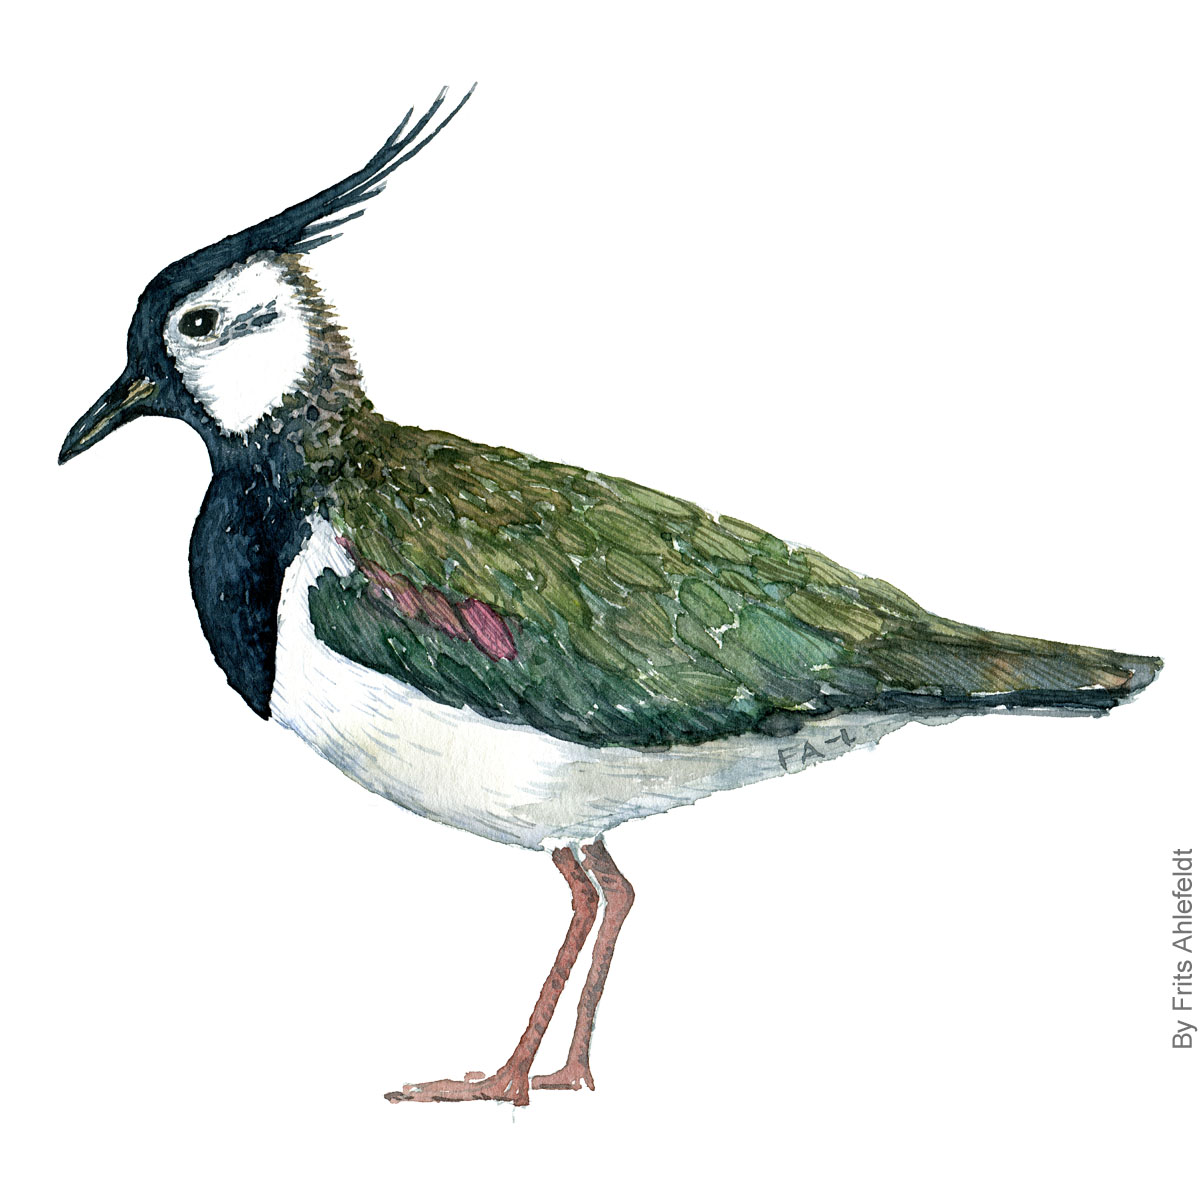 Watercolour illustration of Northern lapwing bird ( Pewit ) Vibe. Painting by Frits Ahlefeldt